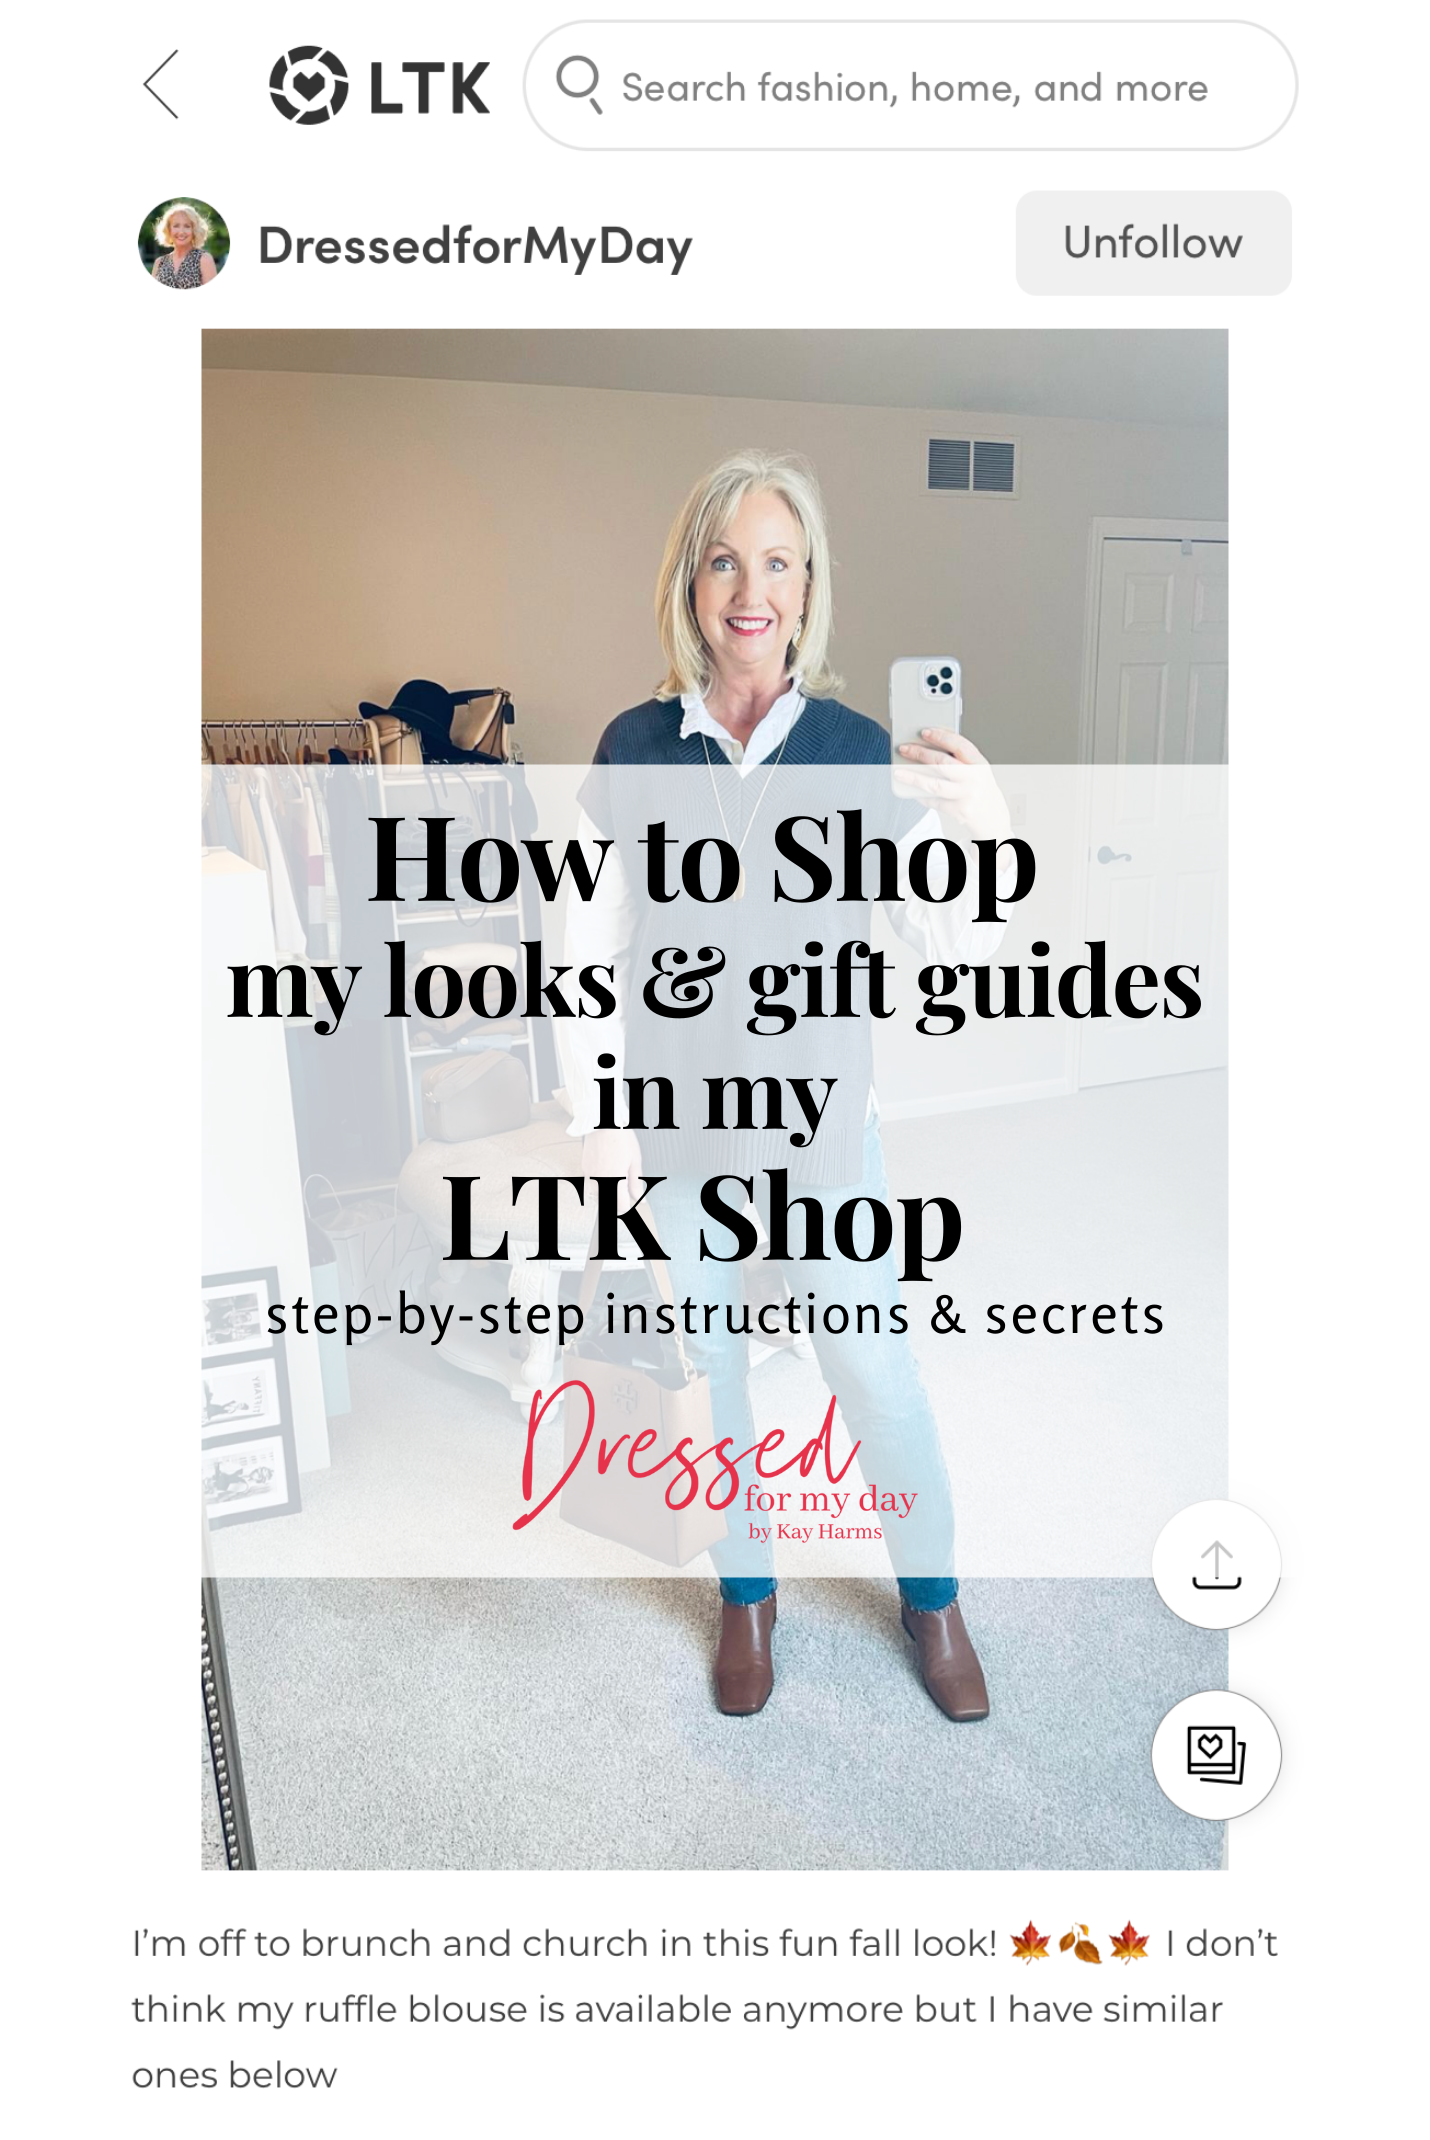 How to Shop my looks & gift guides